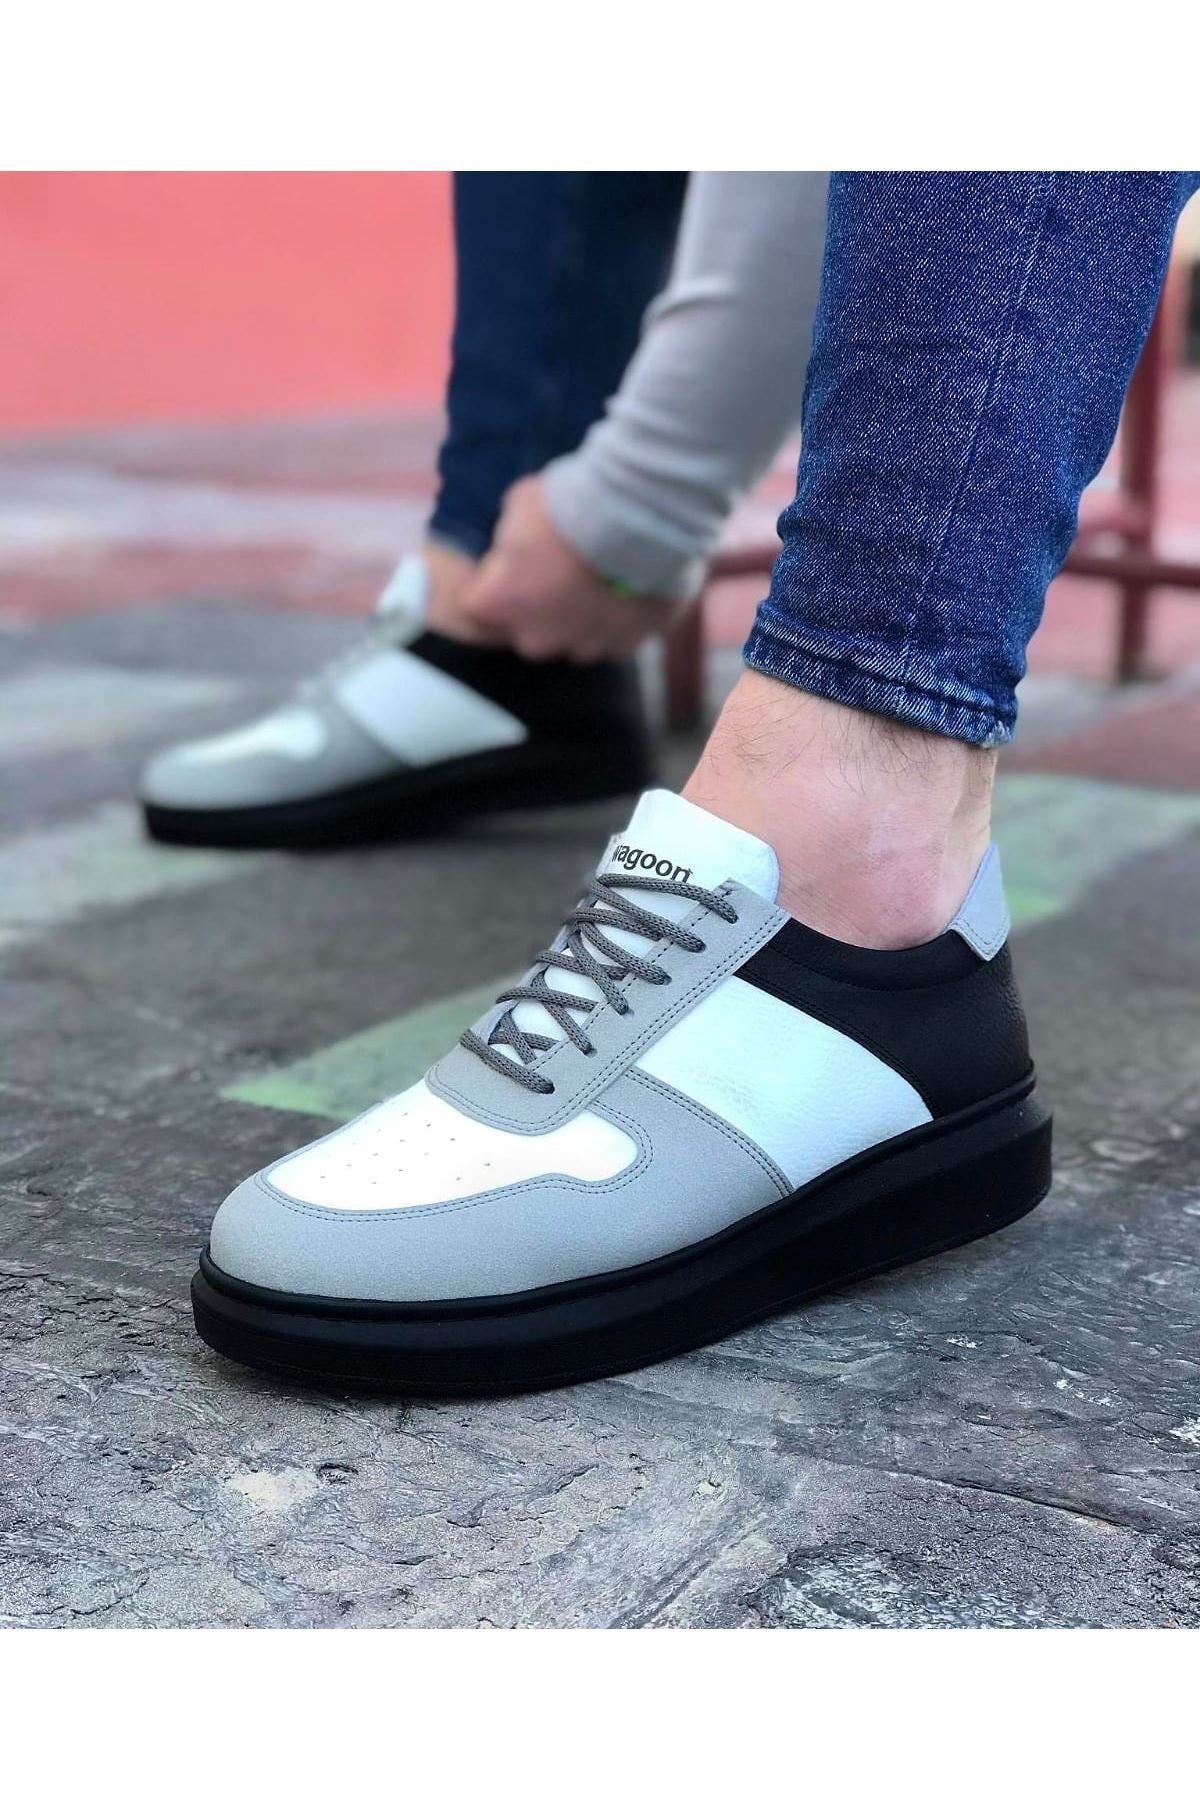 WG011 White Charcoal Men's Casual Shoes - STREETMODE ™